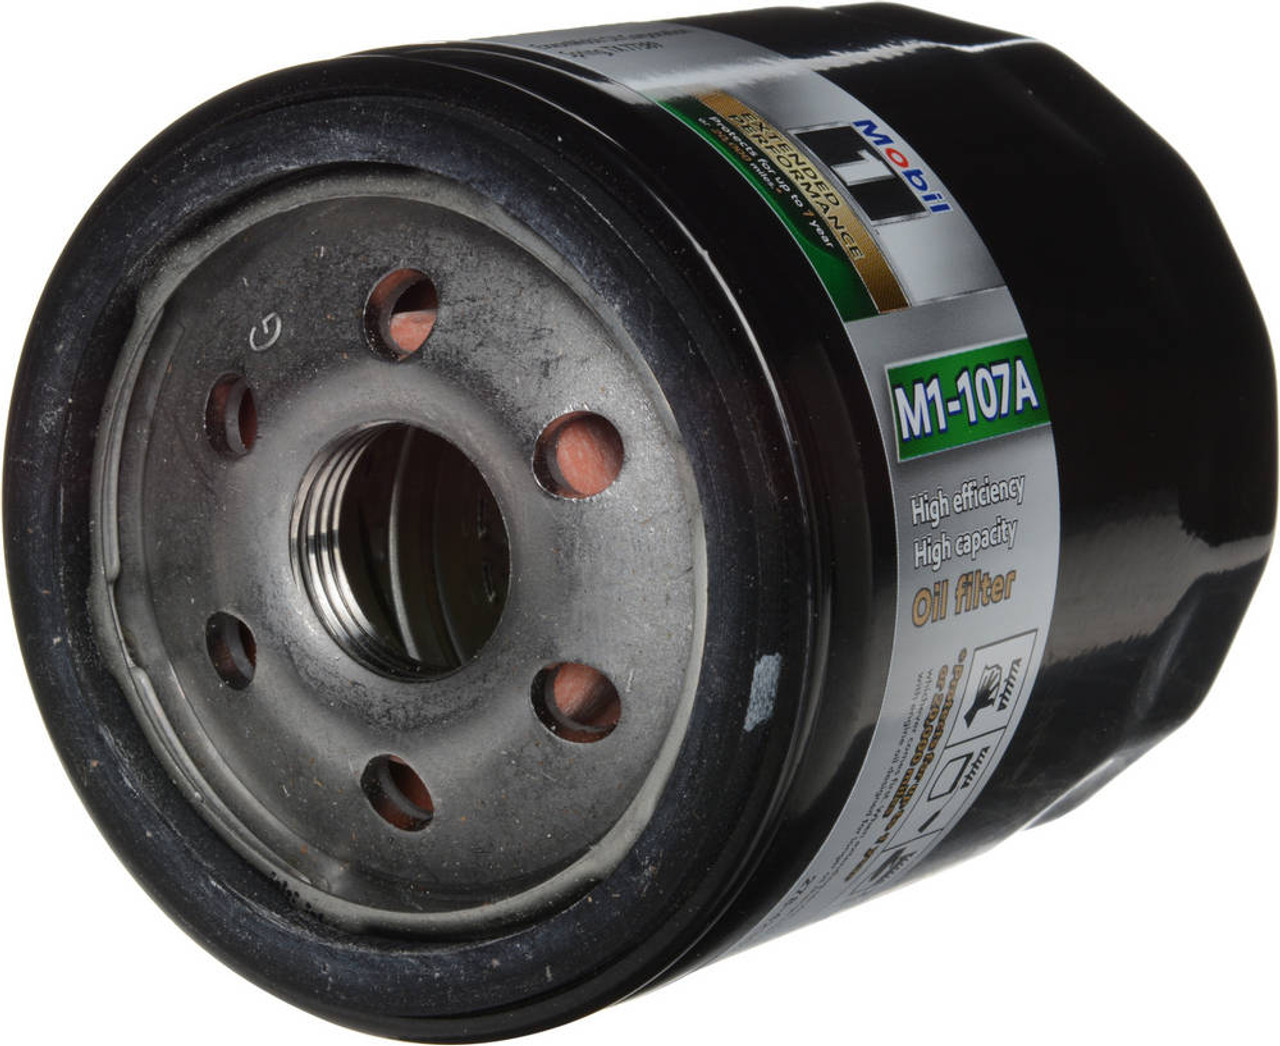 Mobil 1 Mobil 1 Extended Perform ance Oil Filter M1-107A - MOBM1-107A